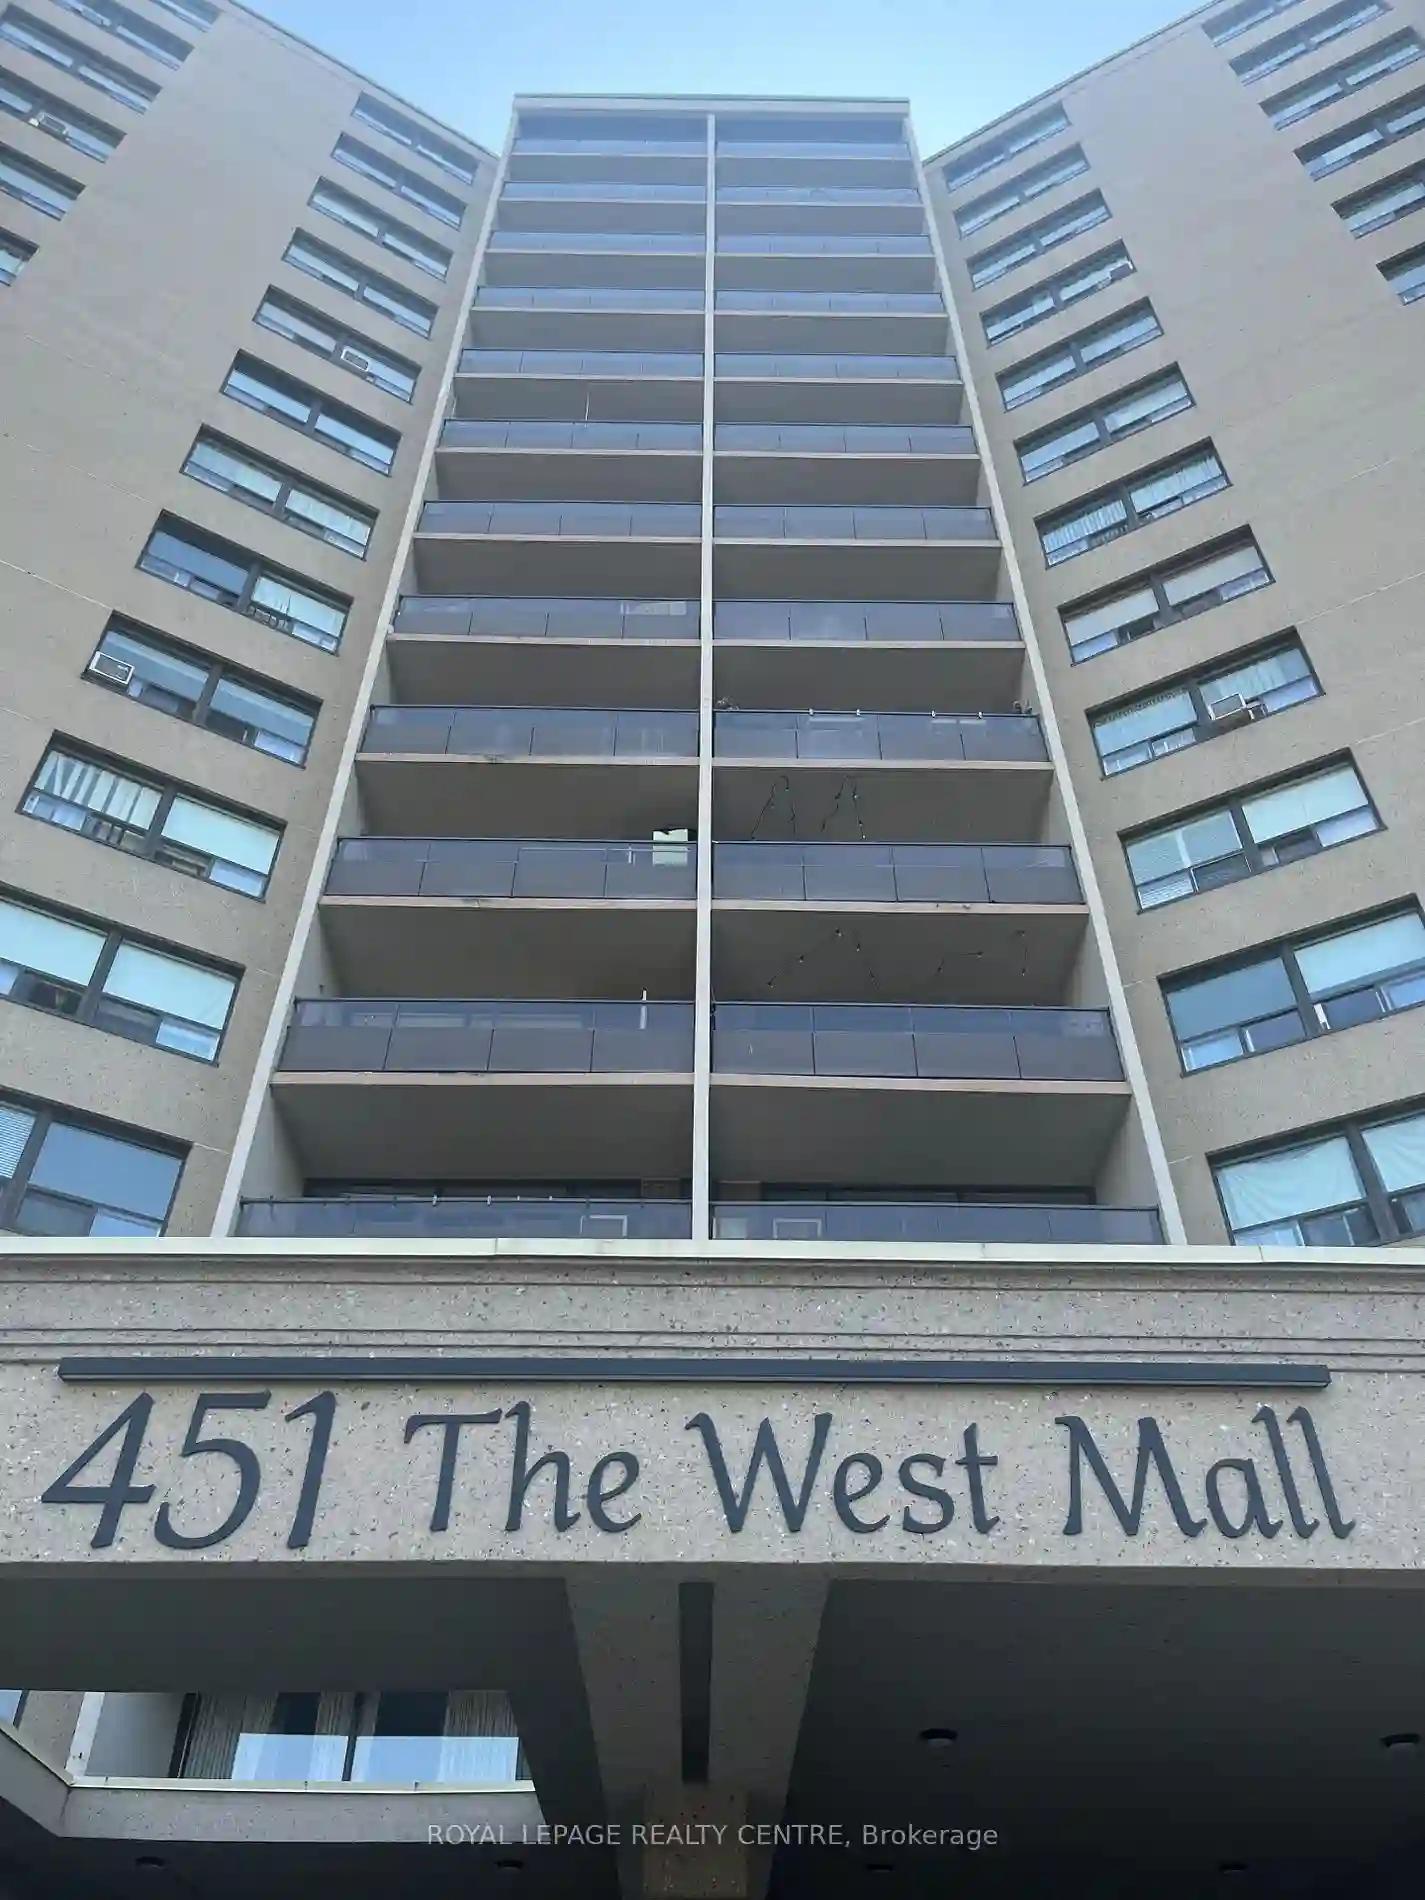 451 The West Mall